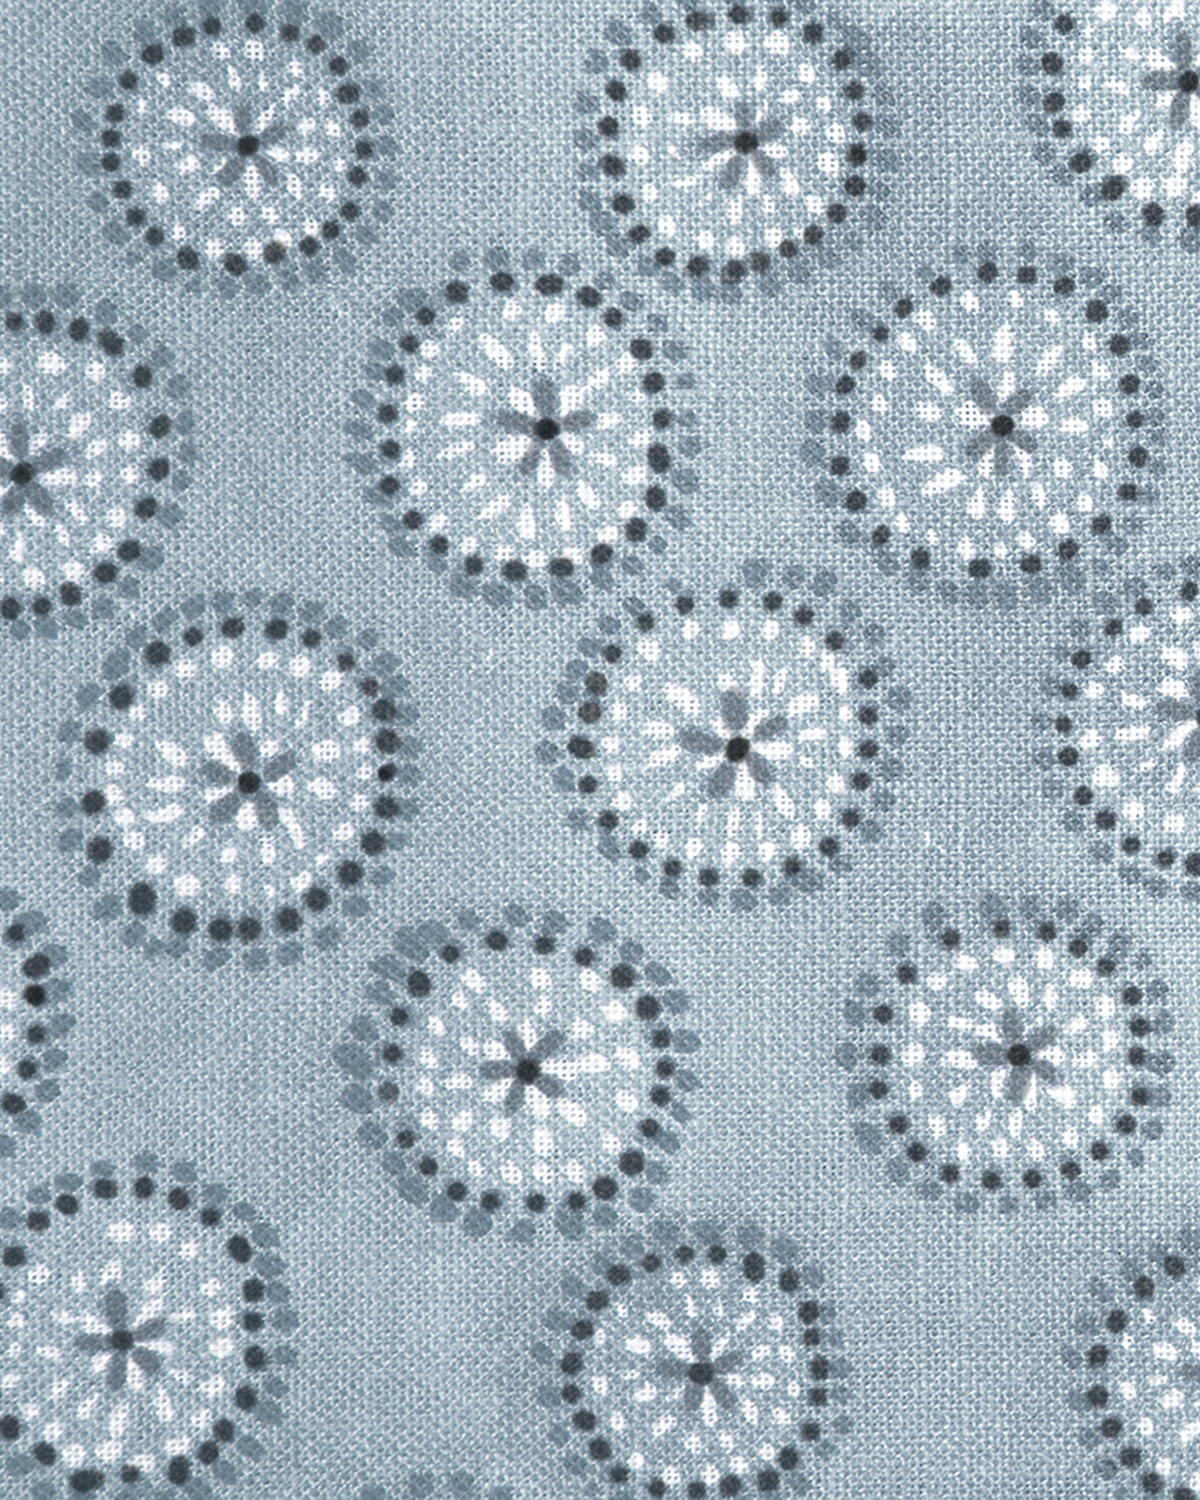 Dotted Floral Fabric in Blue-Gray